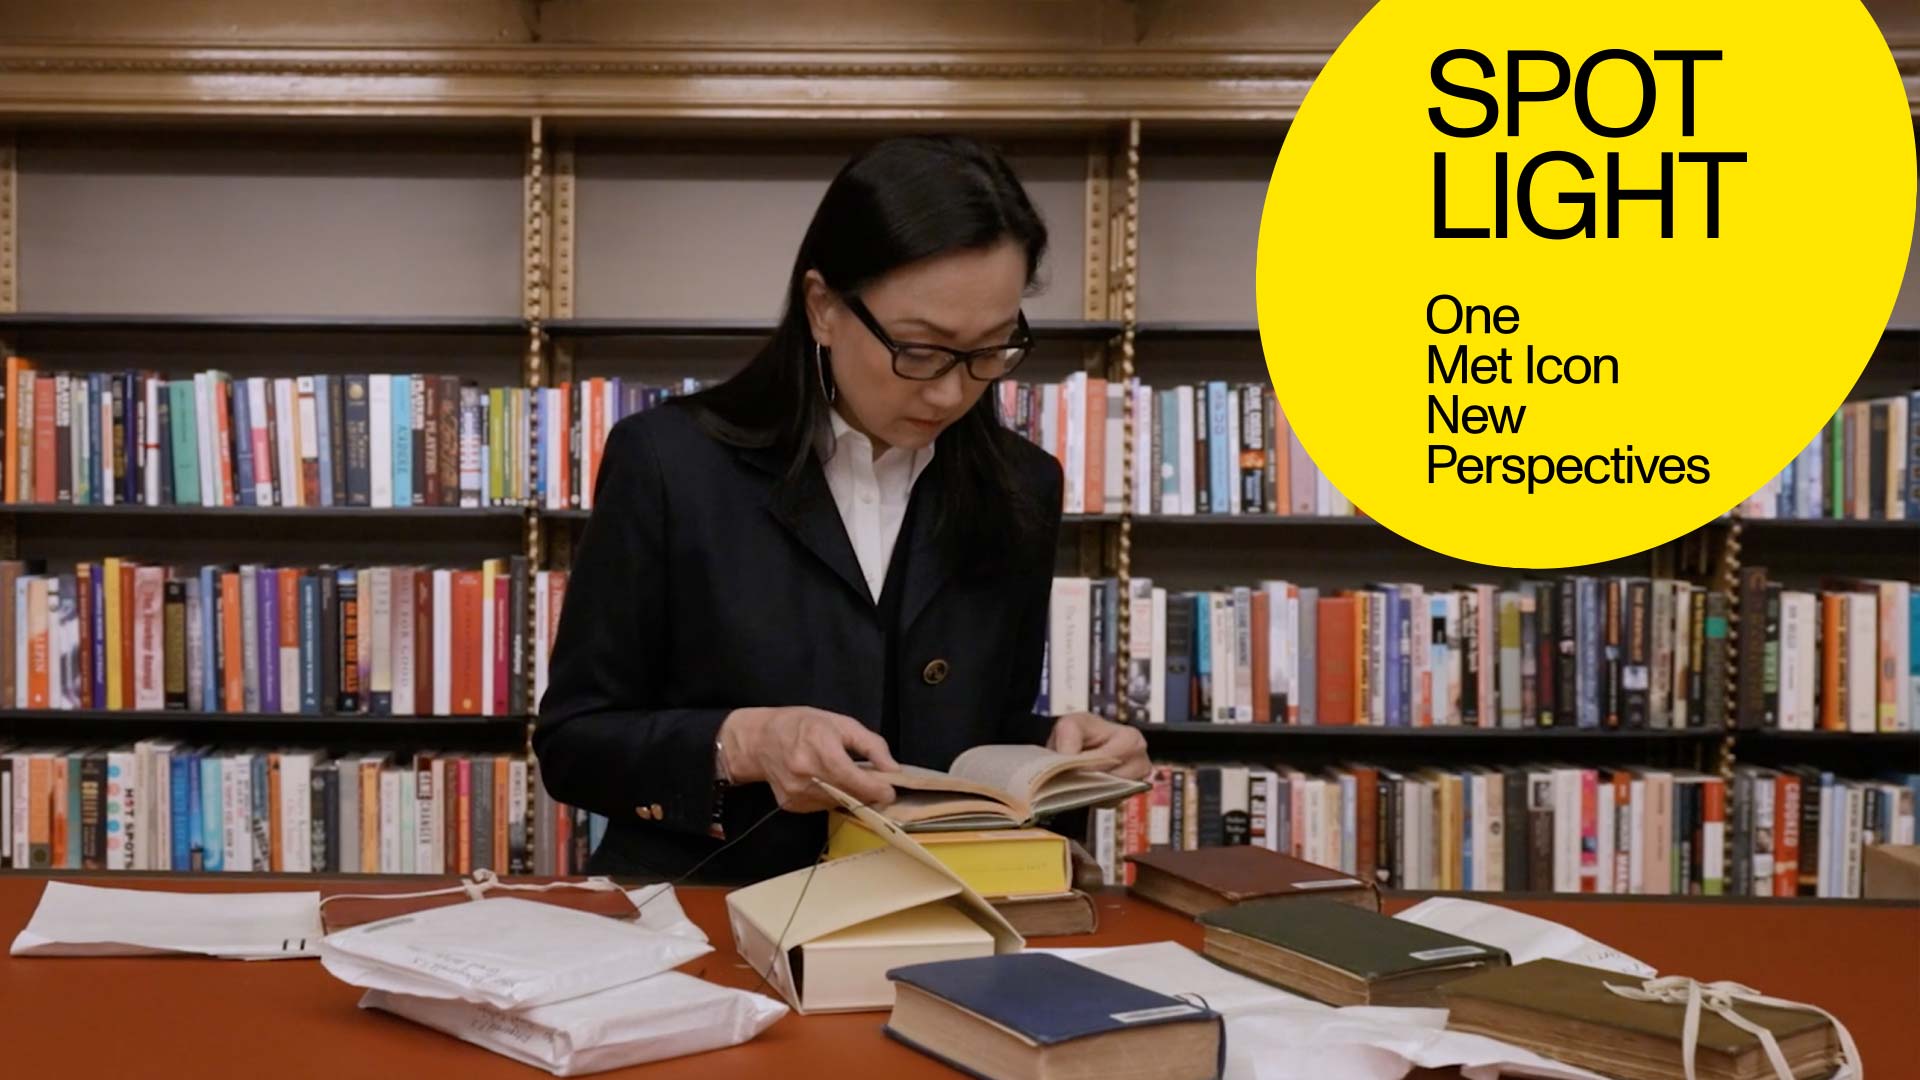 The Novelist Min Jin Lee peruses through an assortment of books atop a red-orange tabletop surface, set against a backdrop of book shelves in a New York Public Library study room.